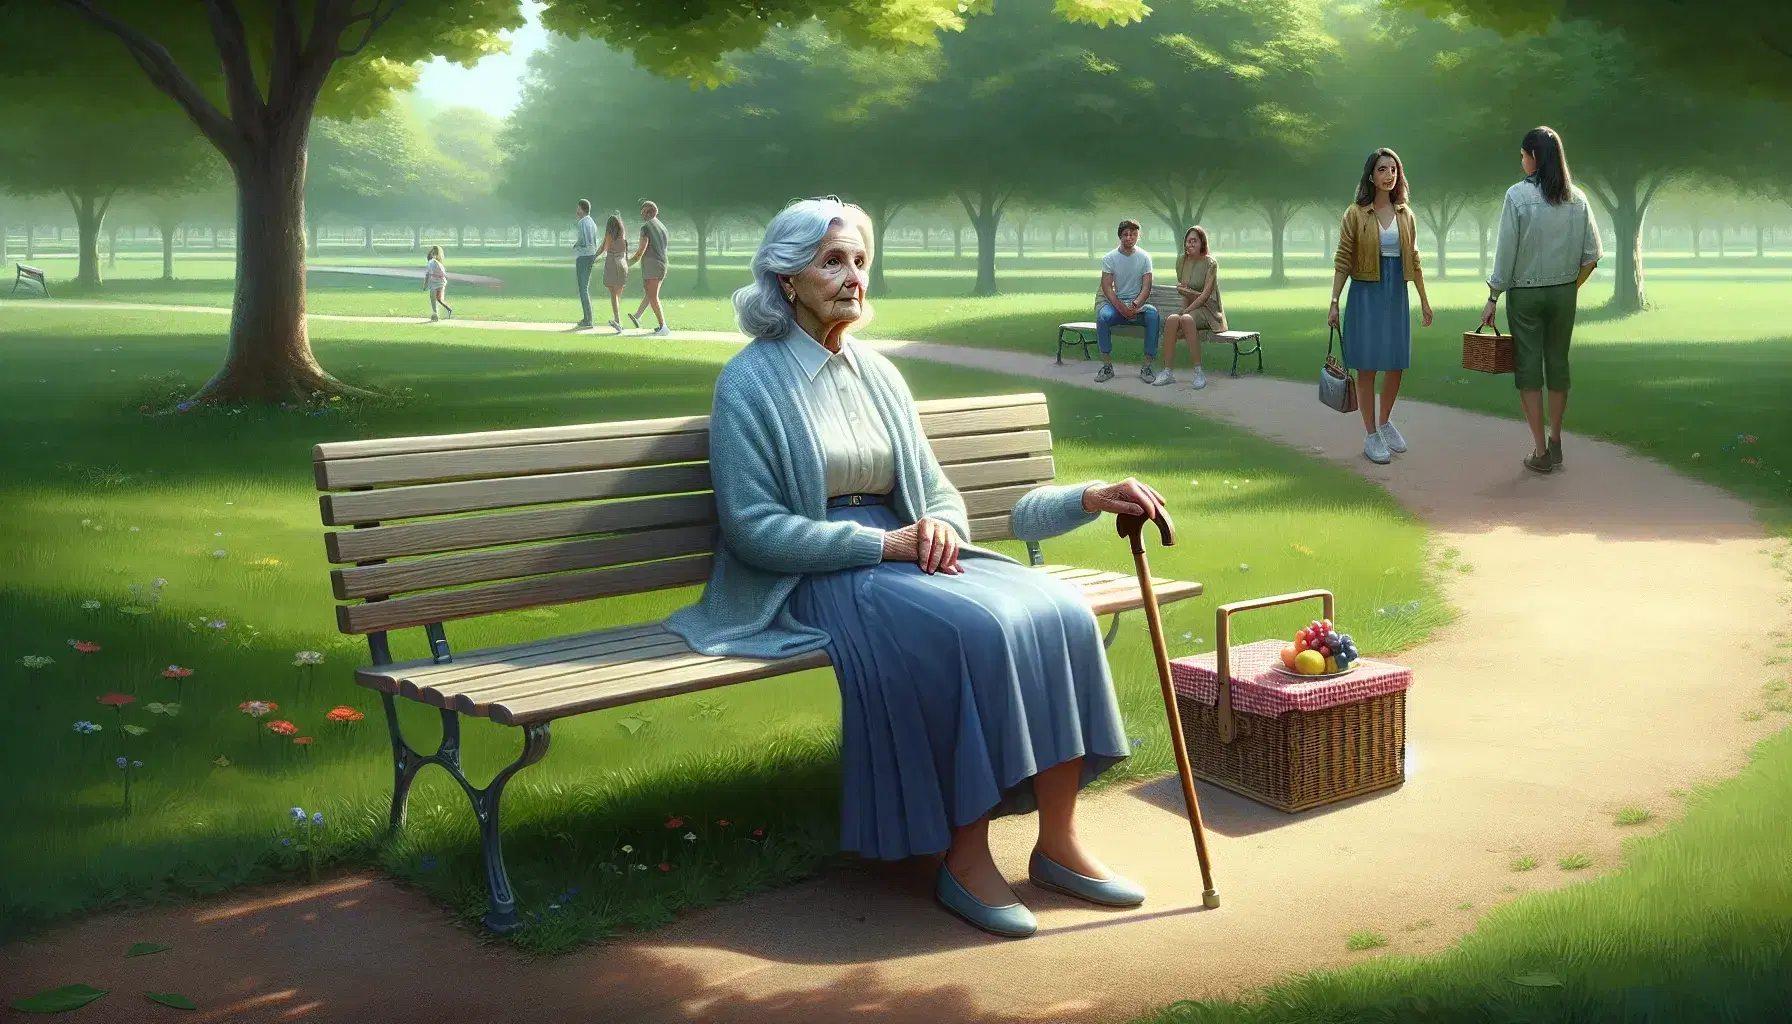 Elderly woman sitting on a park bench with a cane and picnic basket, surrounded by diverse people enjoying outdoor activities on a sunny day.